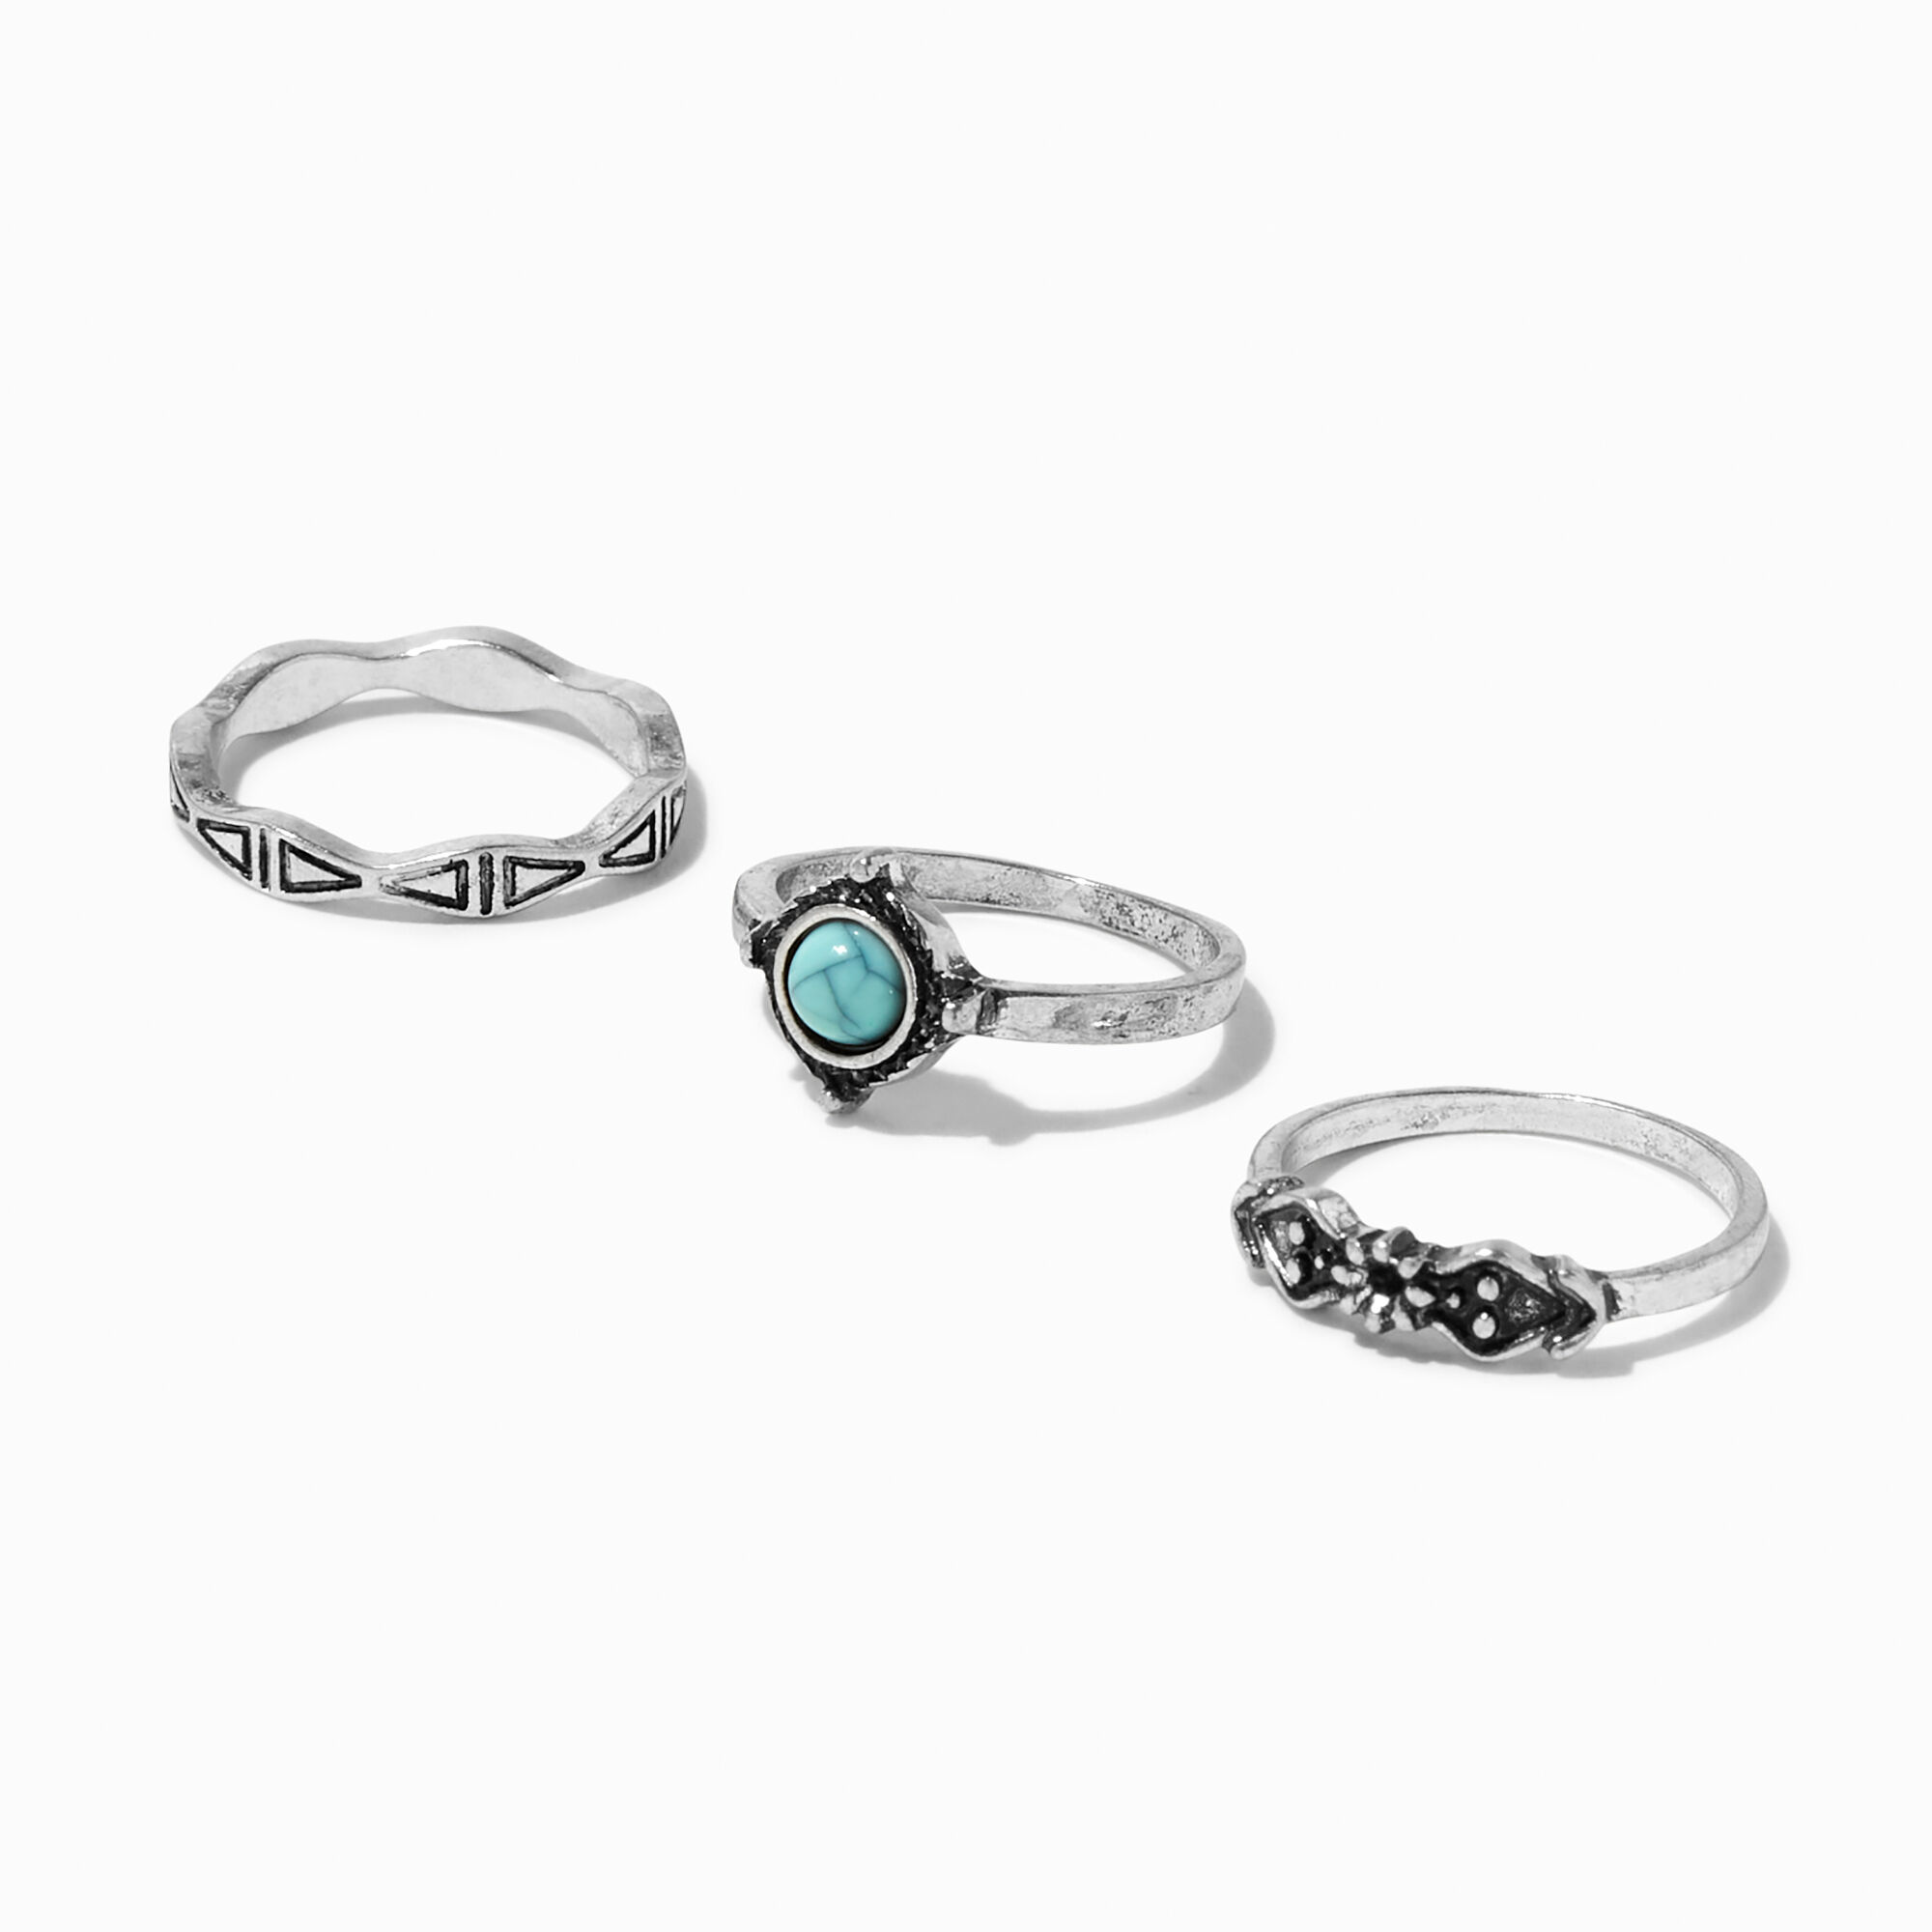 View Claires Boho Burnished SilverTone Ring Set 3 Pack Turquoise information